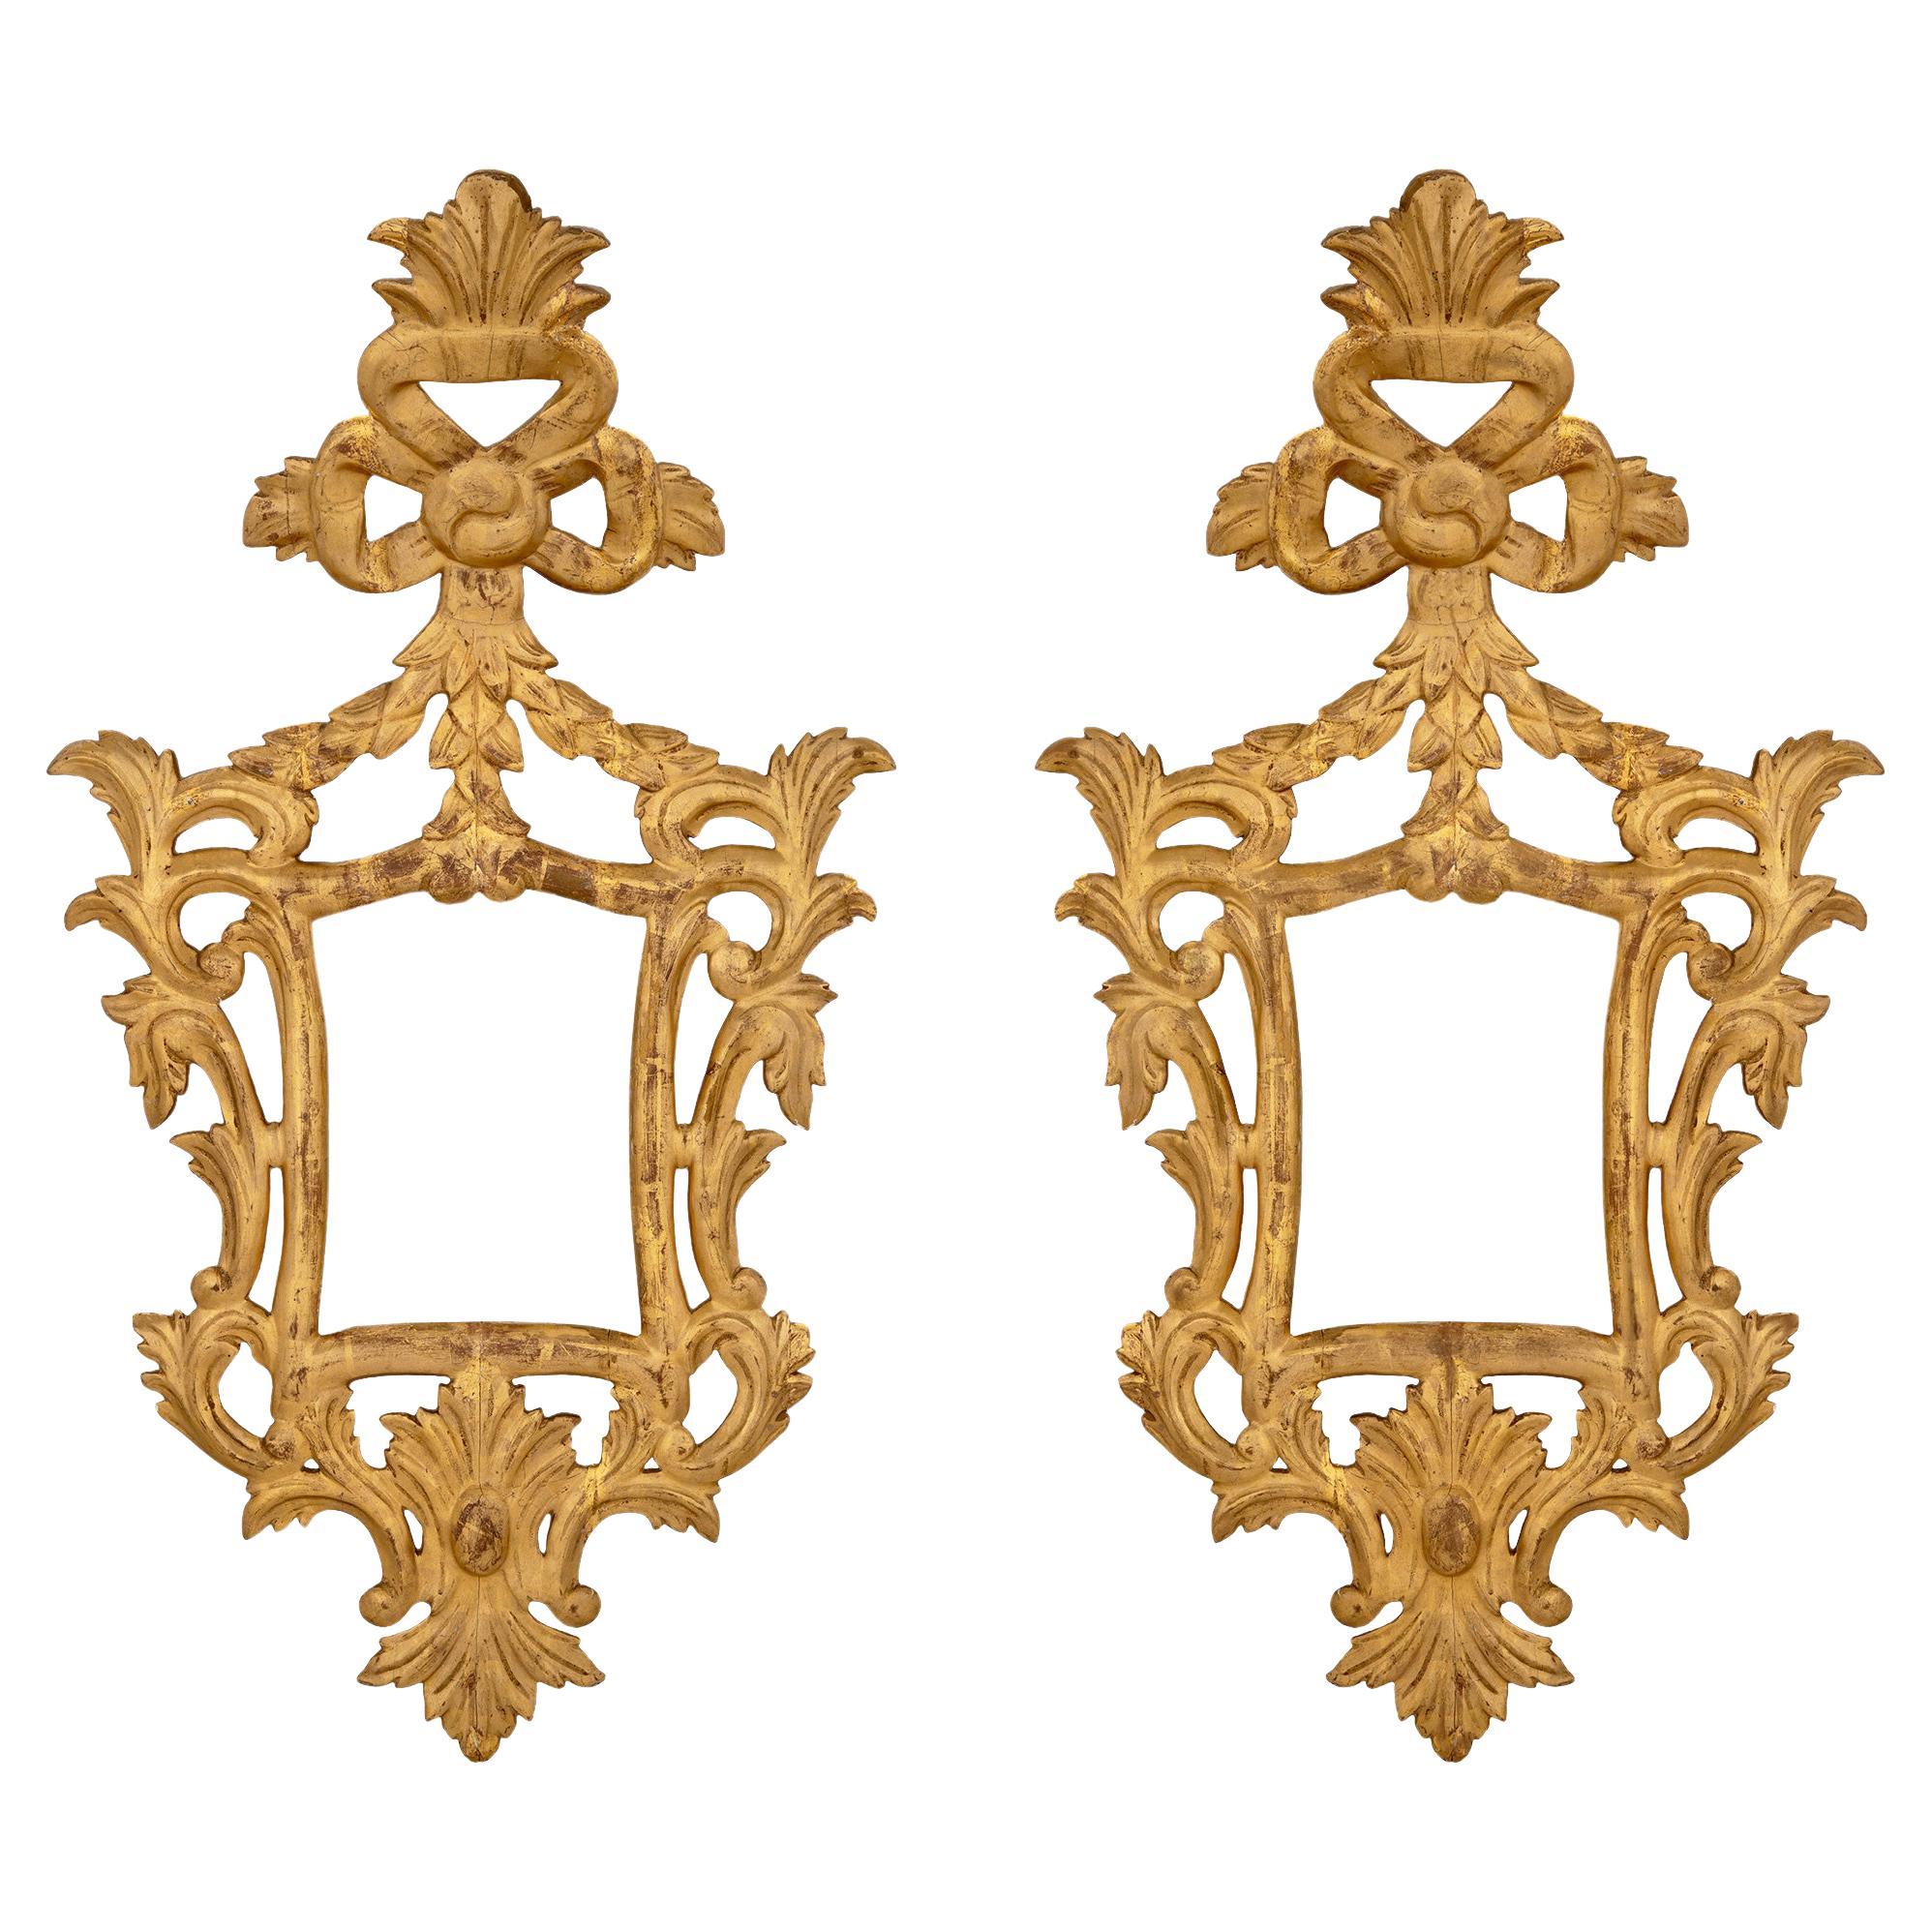 Pair of Italian Mid-18th Century Baroque Style Giltwood Mirrors For Sale